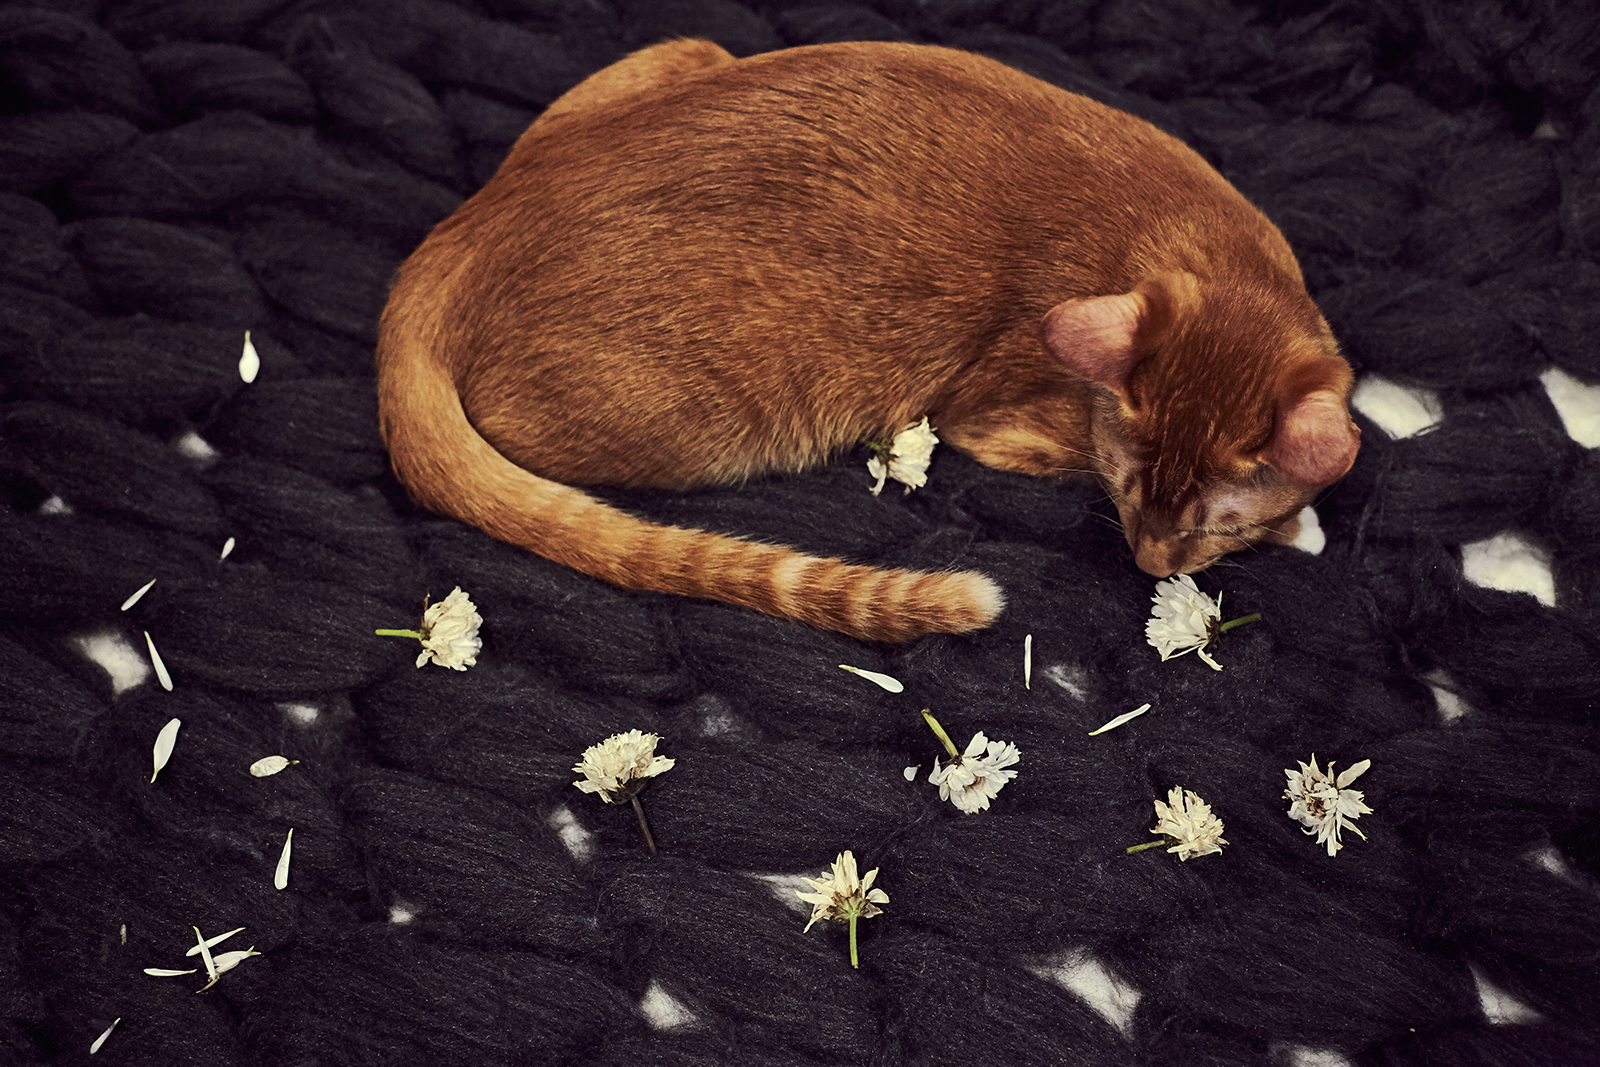 Kitty Teh surrounded by petals from the Mr. Crush Teddy Bear Bouquet from Little Flower Hut.